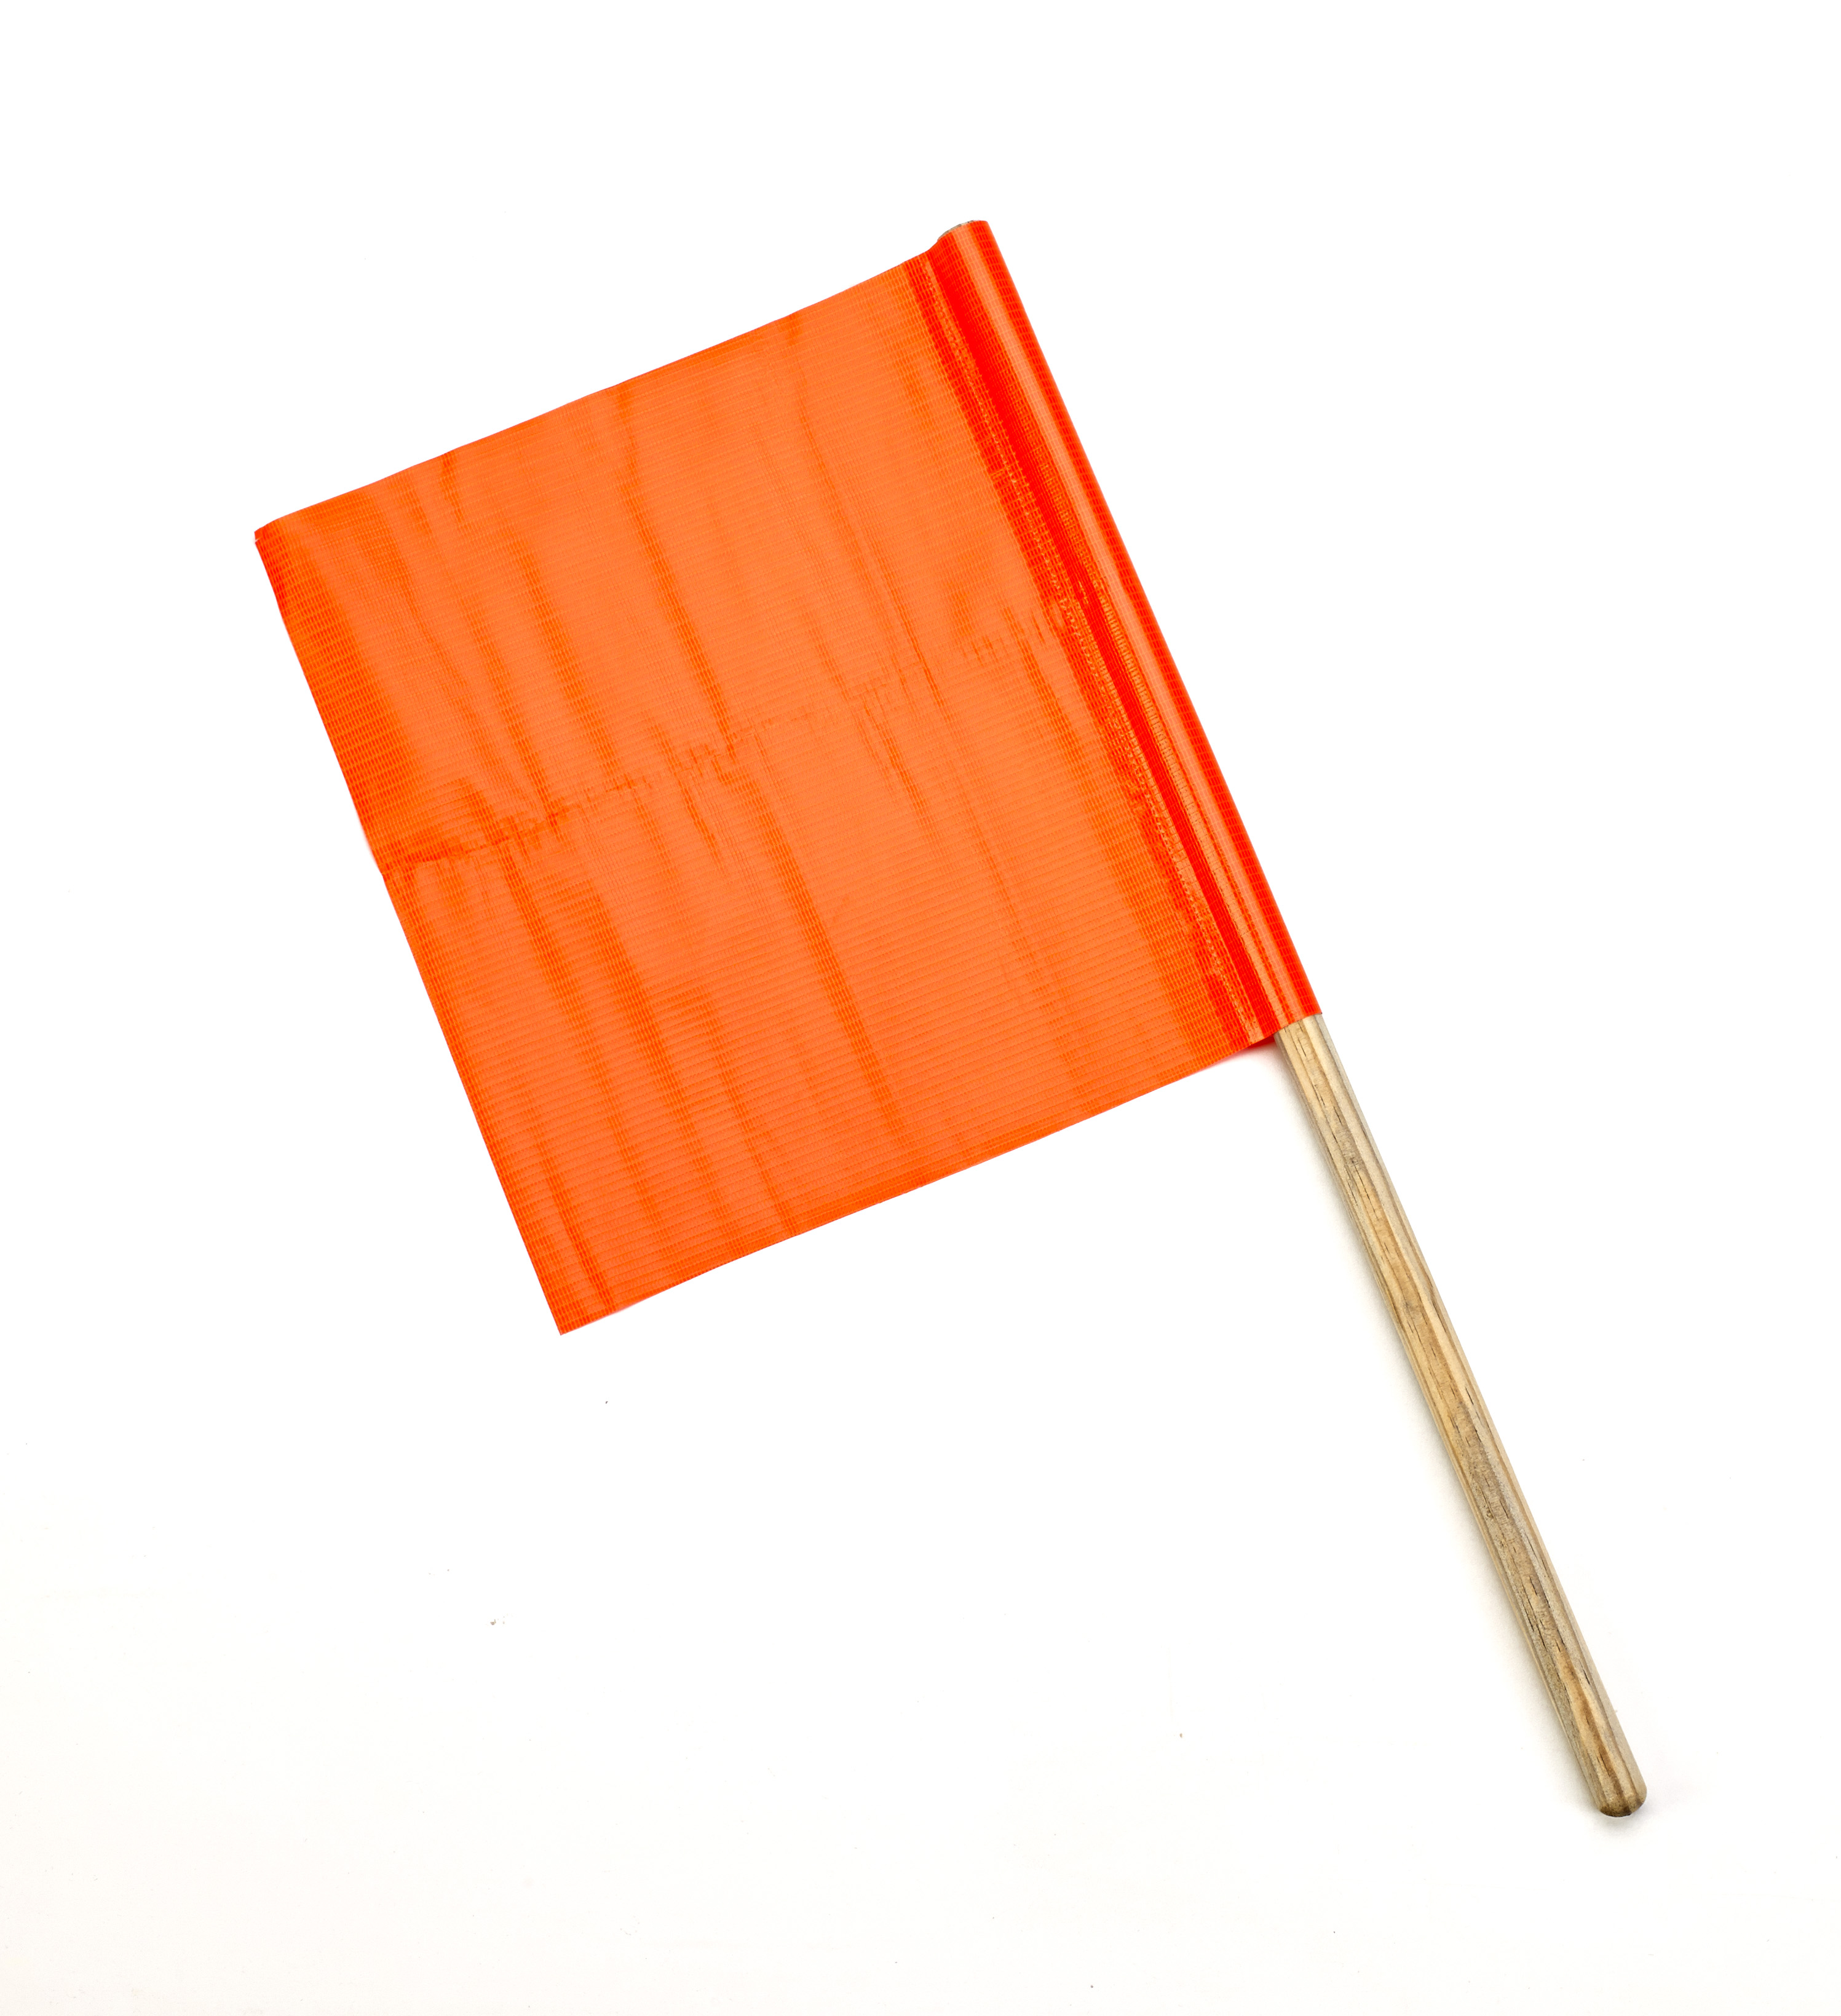 14994-24-18, Vinyl Highway Safety Flags, Reinforced 3-ply, 18 in. x 18 in. x 24 in. staff(pack of 10), Mega Safety Mart